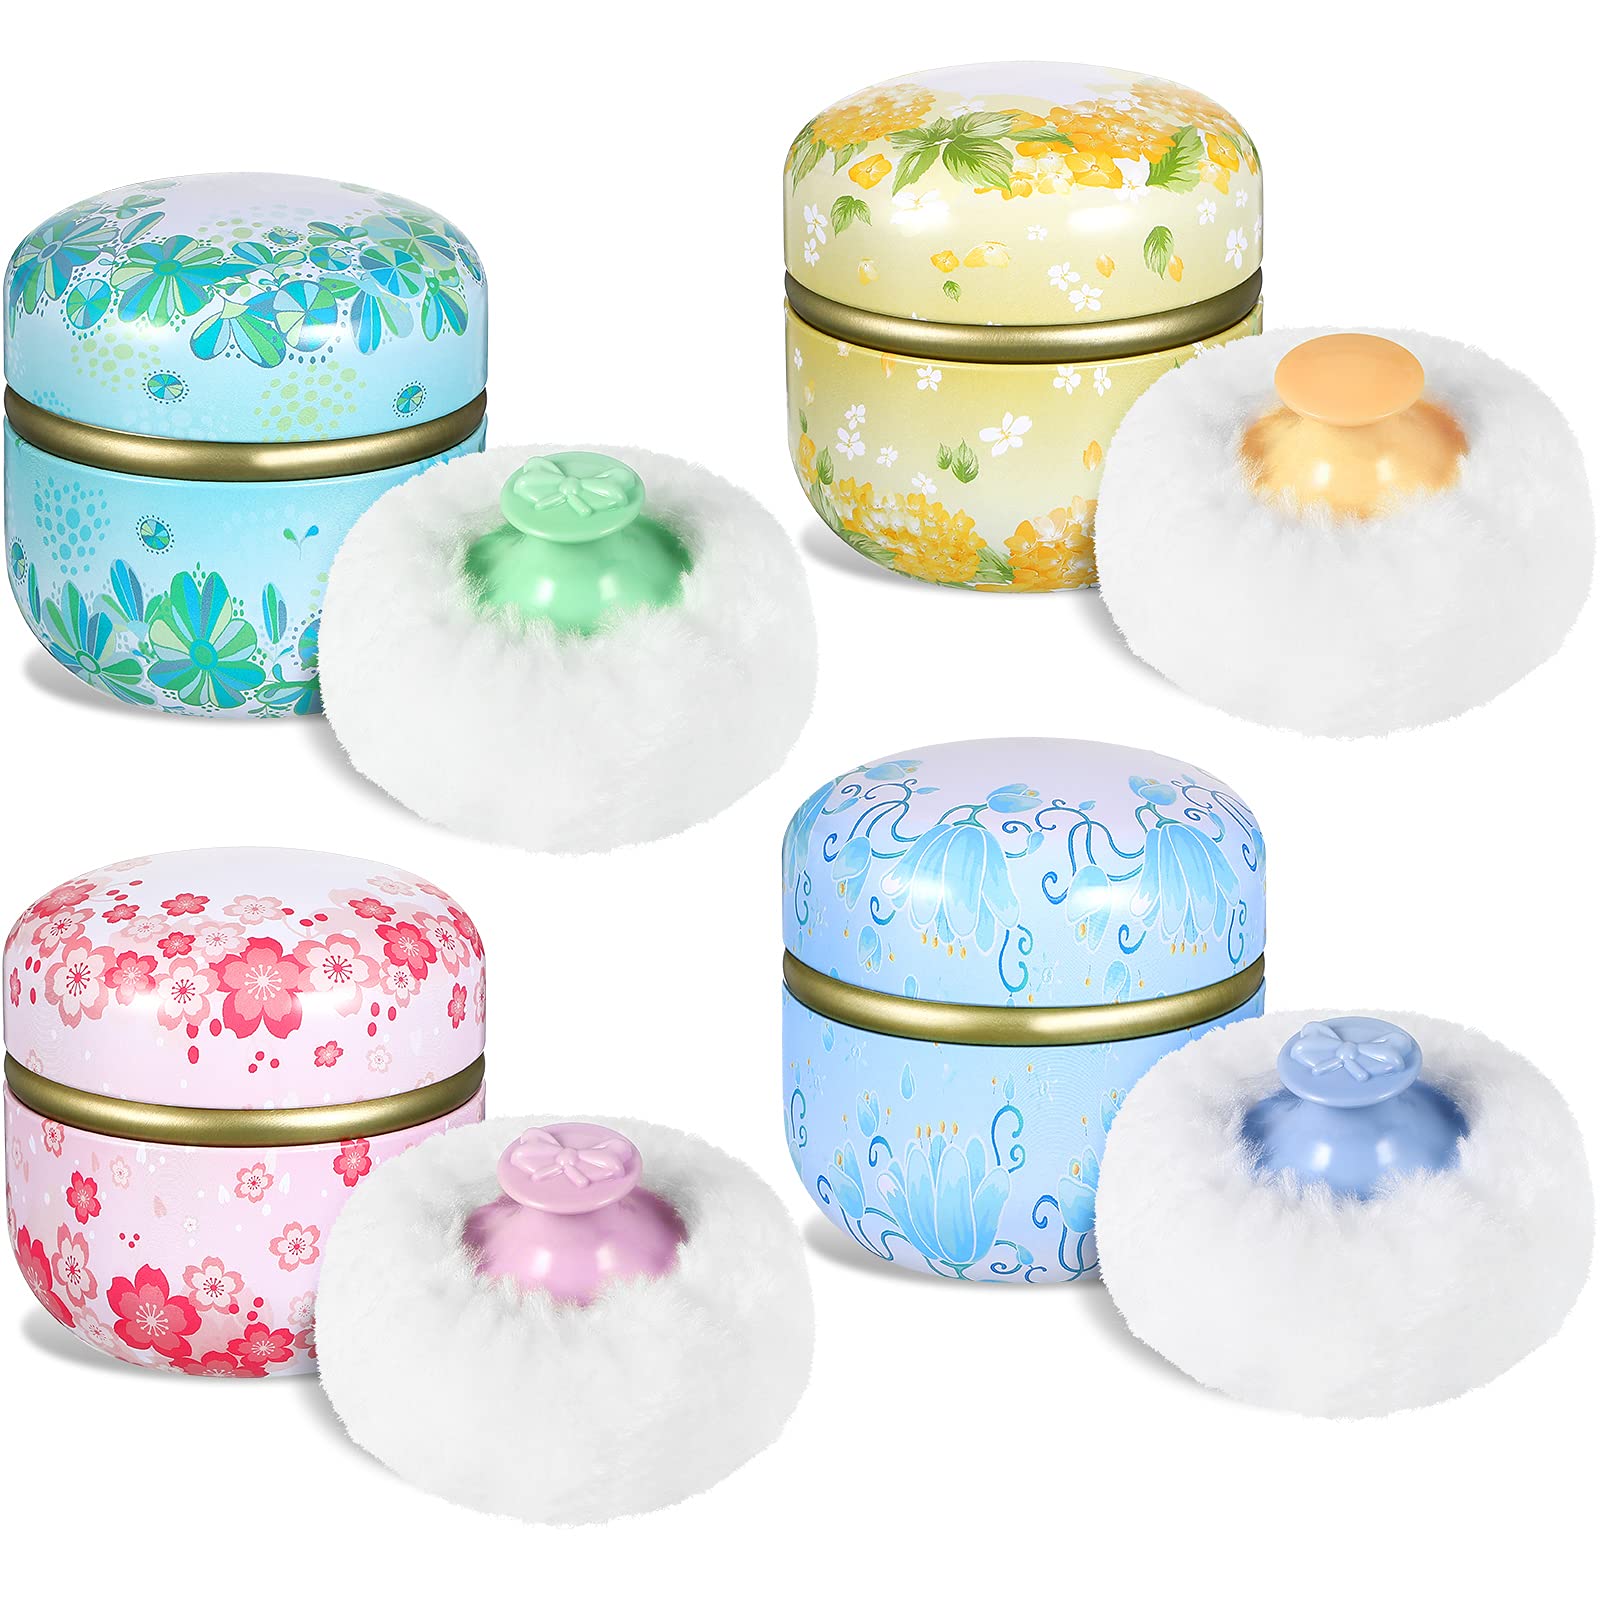 Mogugu - Loose Powder Travel Container with Puff